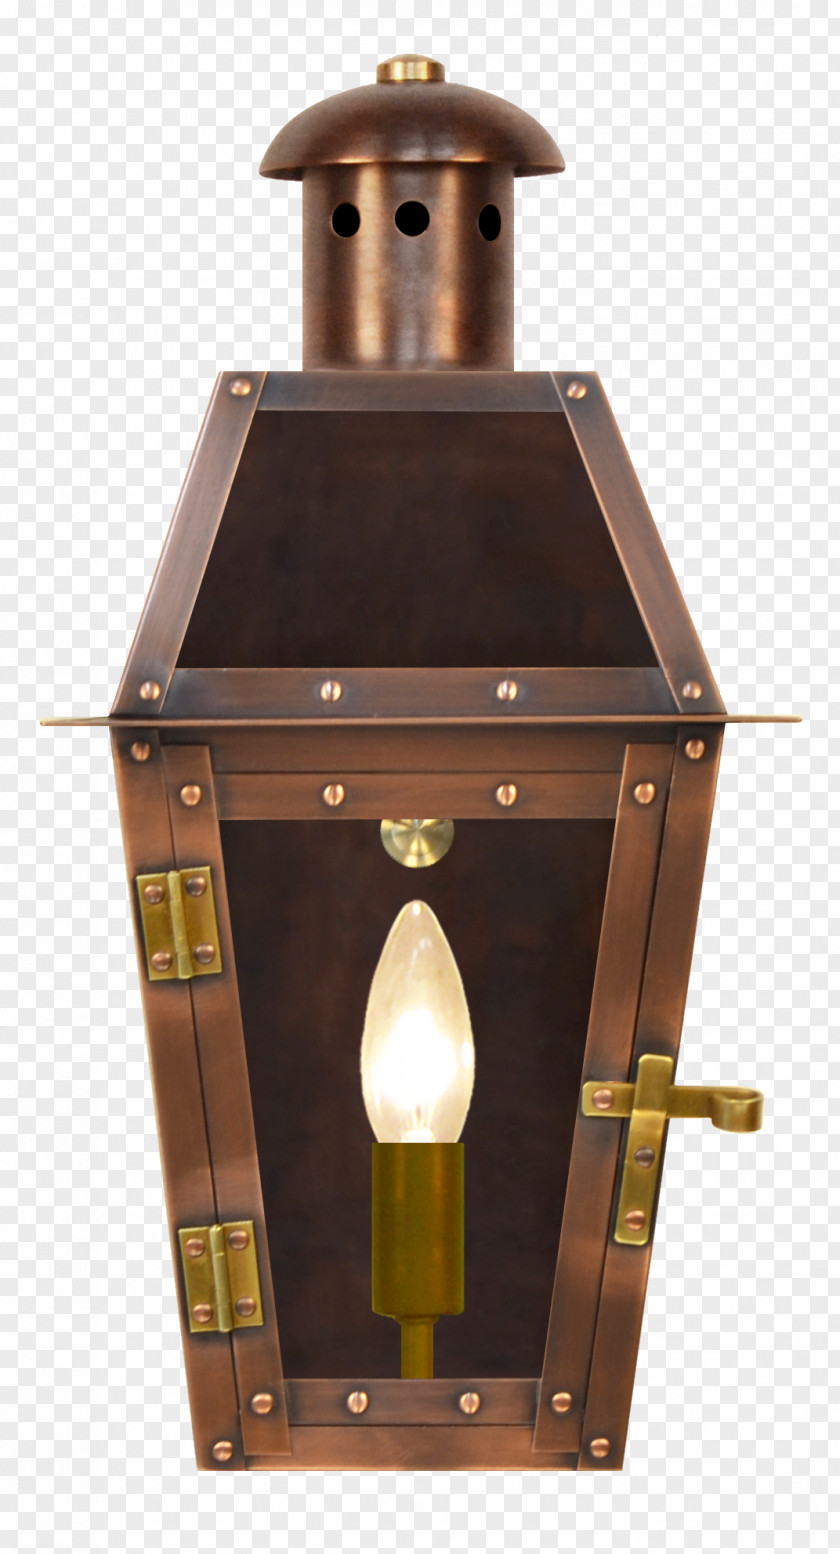 Lantern Mosque Natural Gas Propane Coppersmith Burner PNG